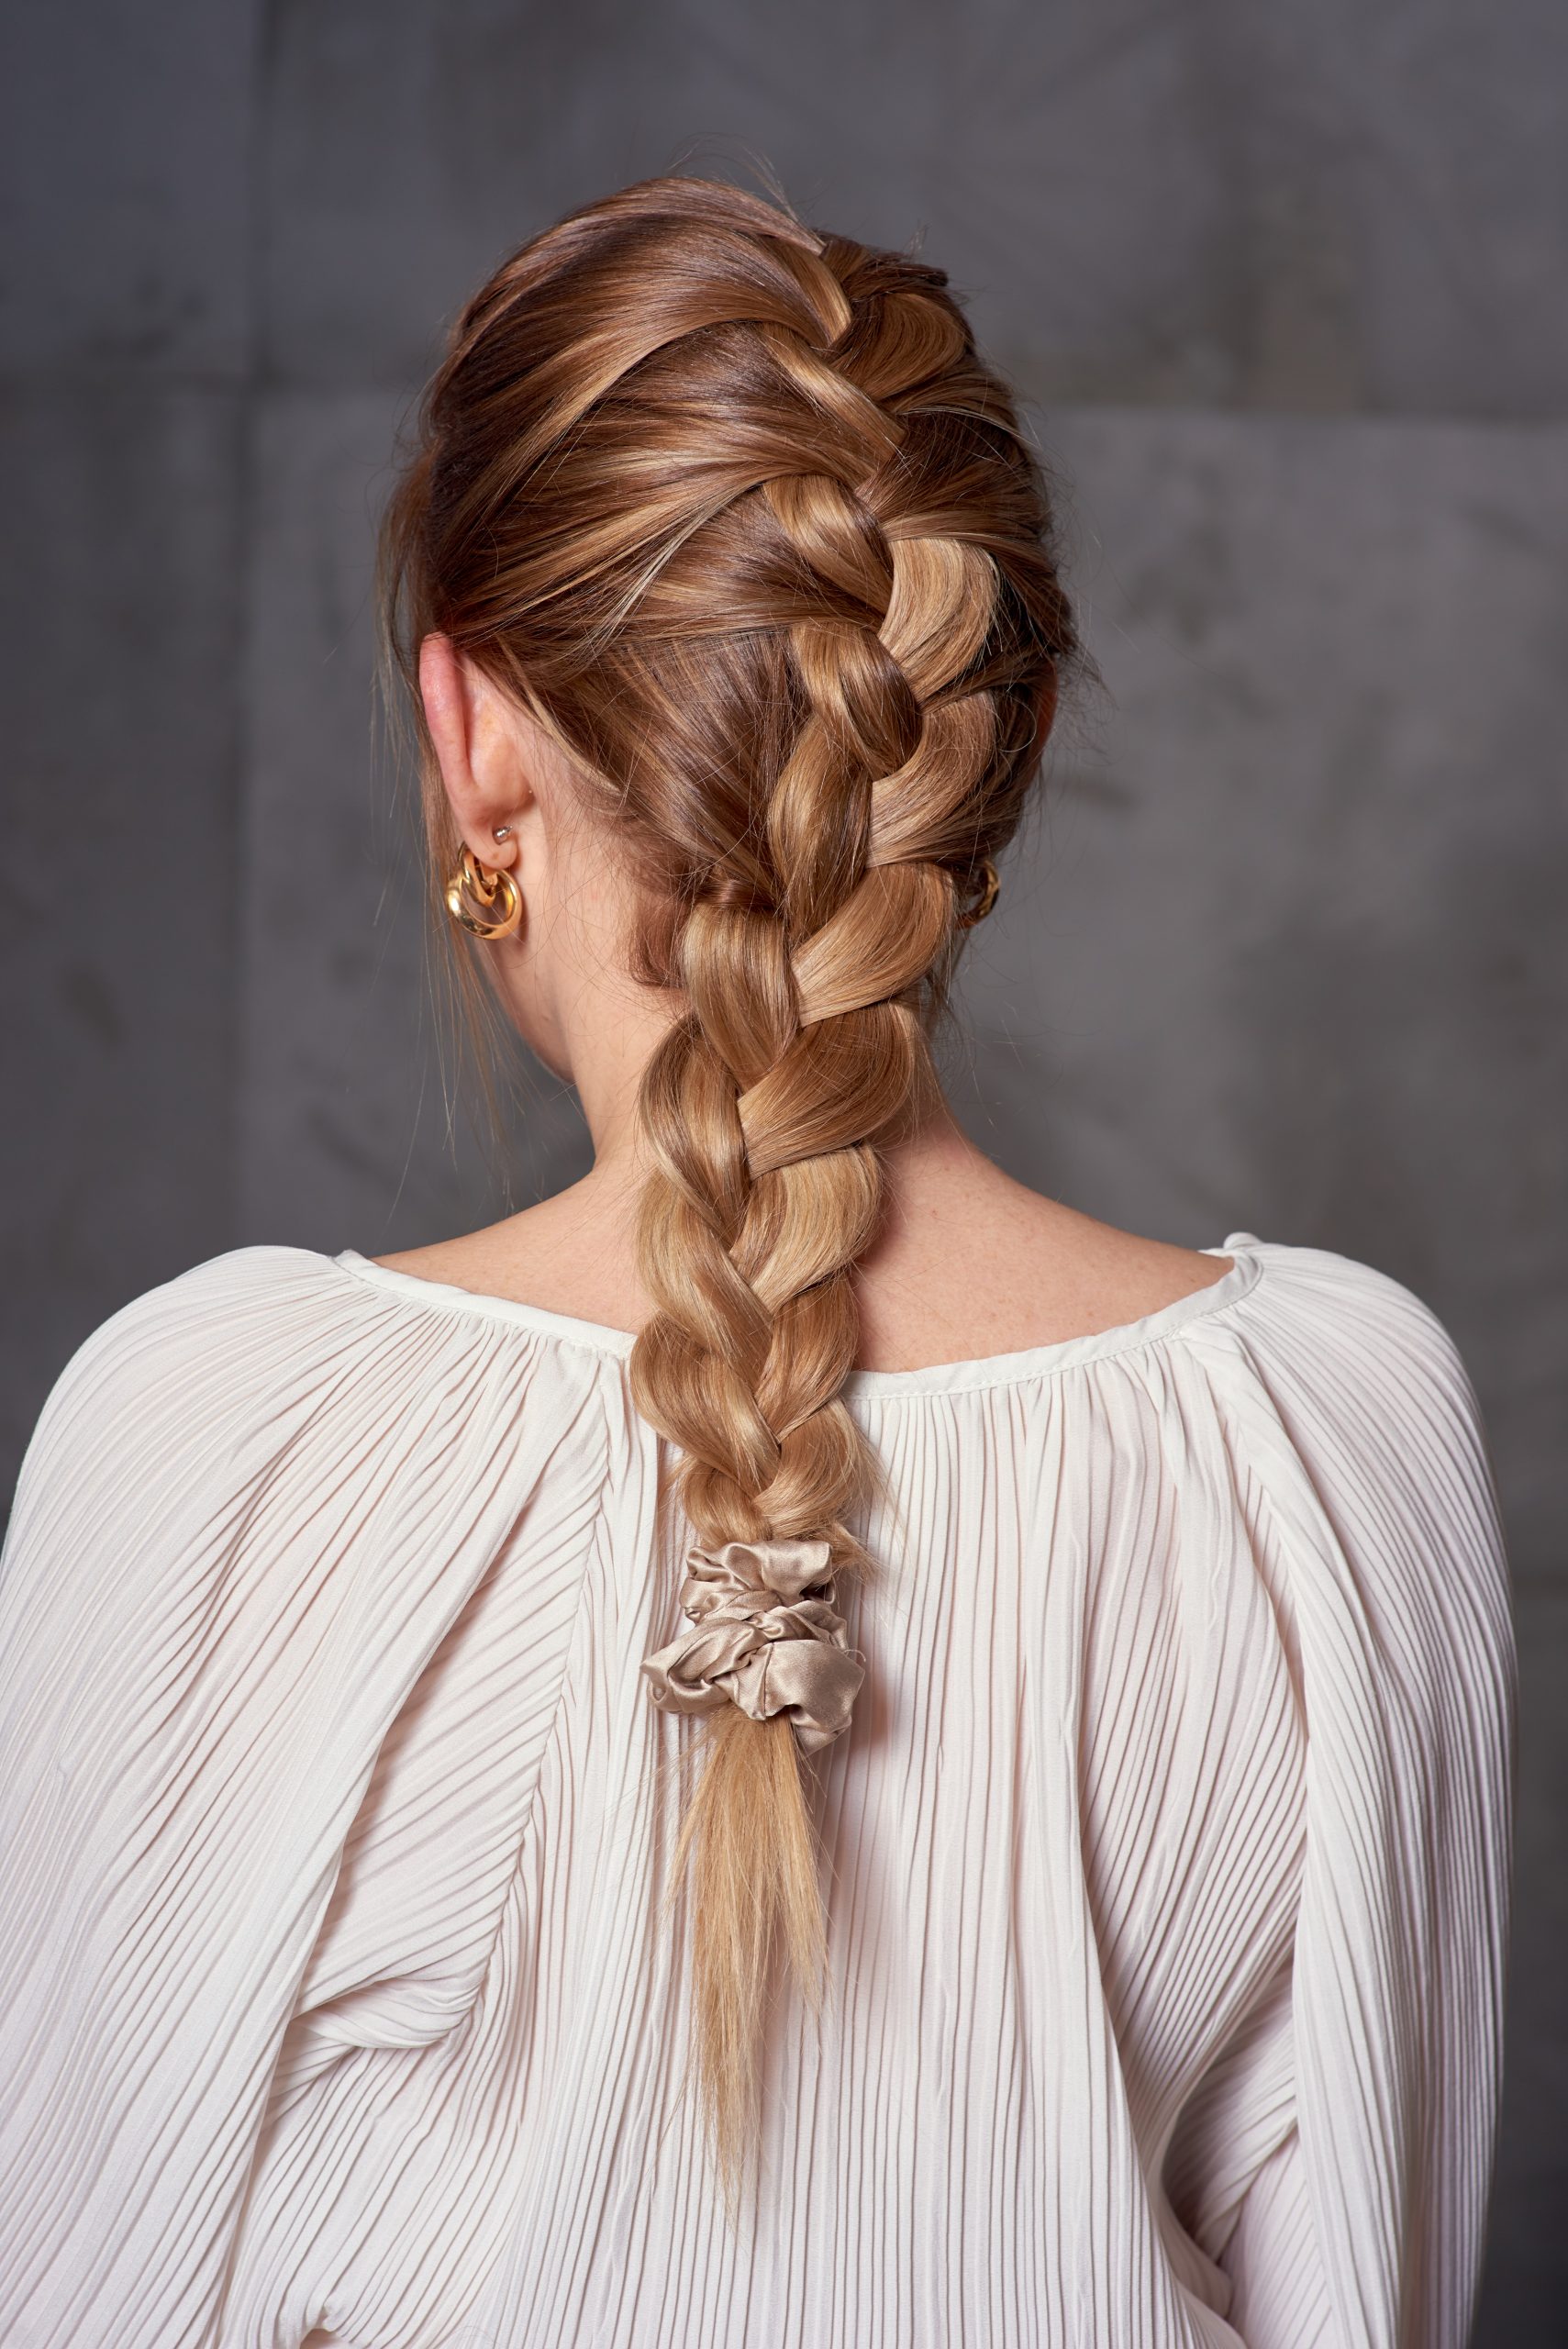 Braided Hairstyle: Front-sided french braids over loose flowing hair